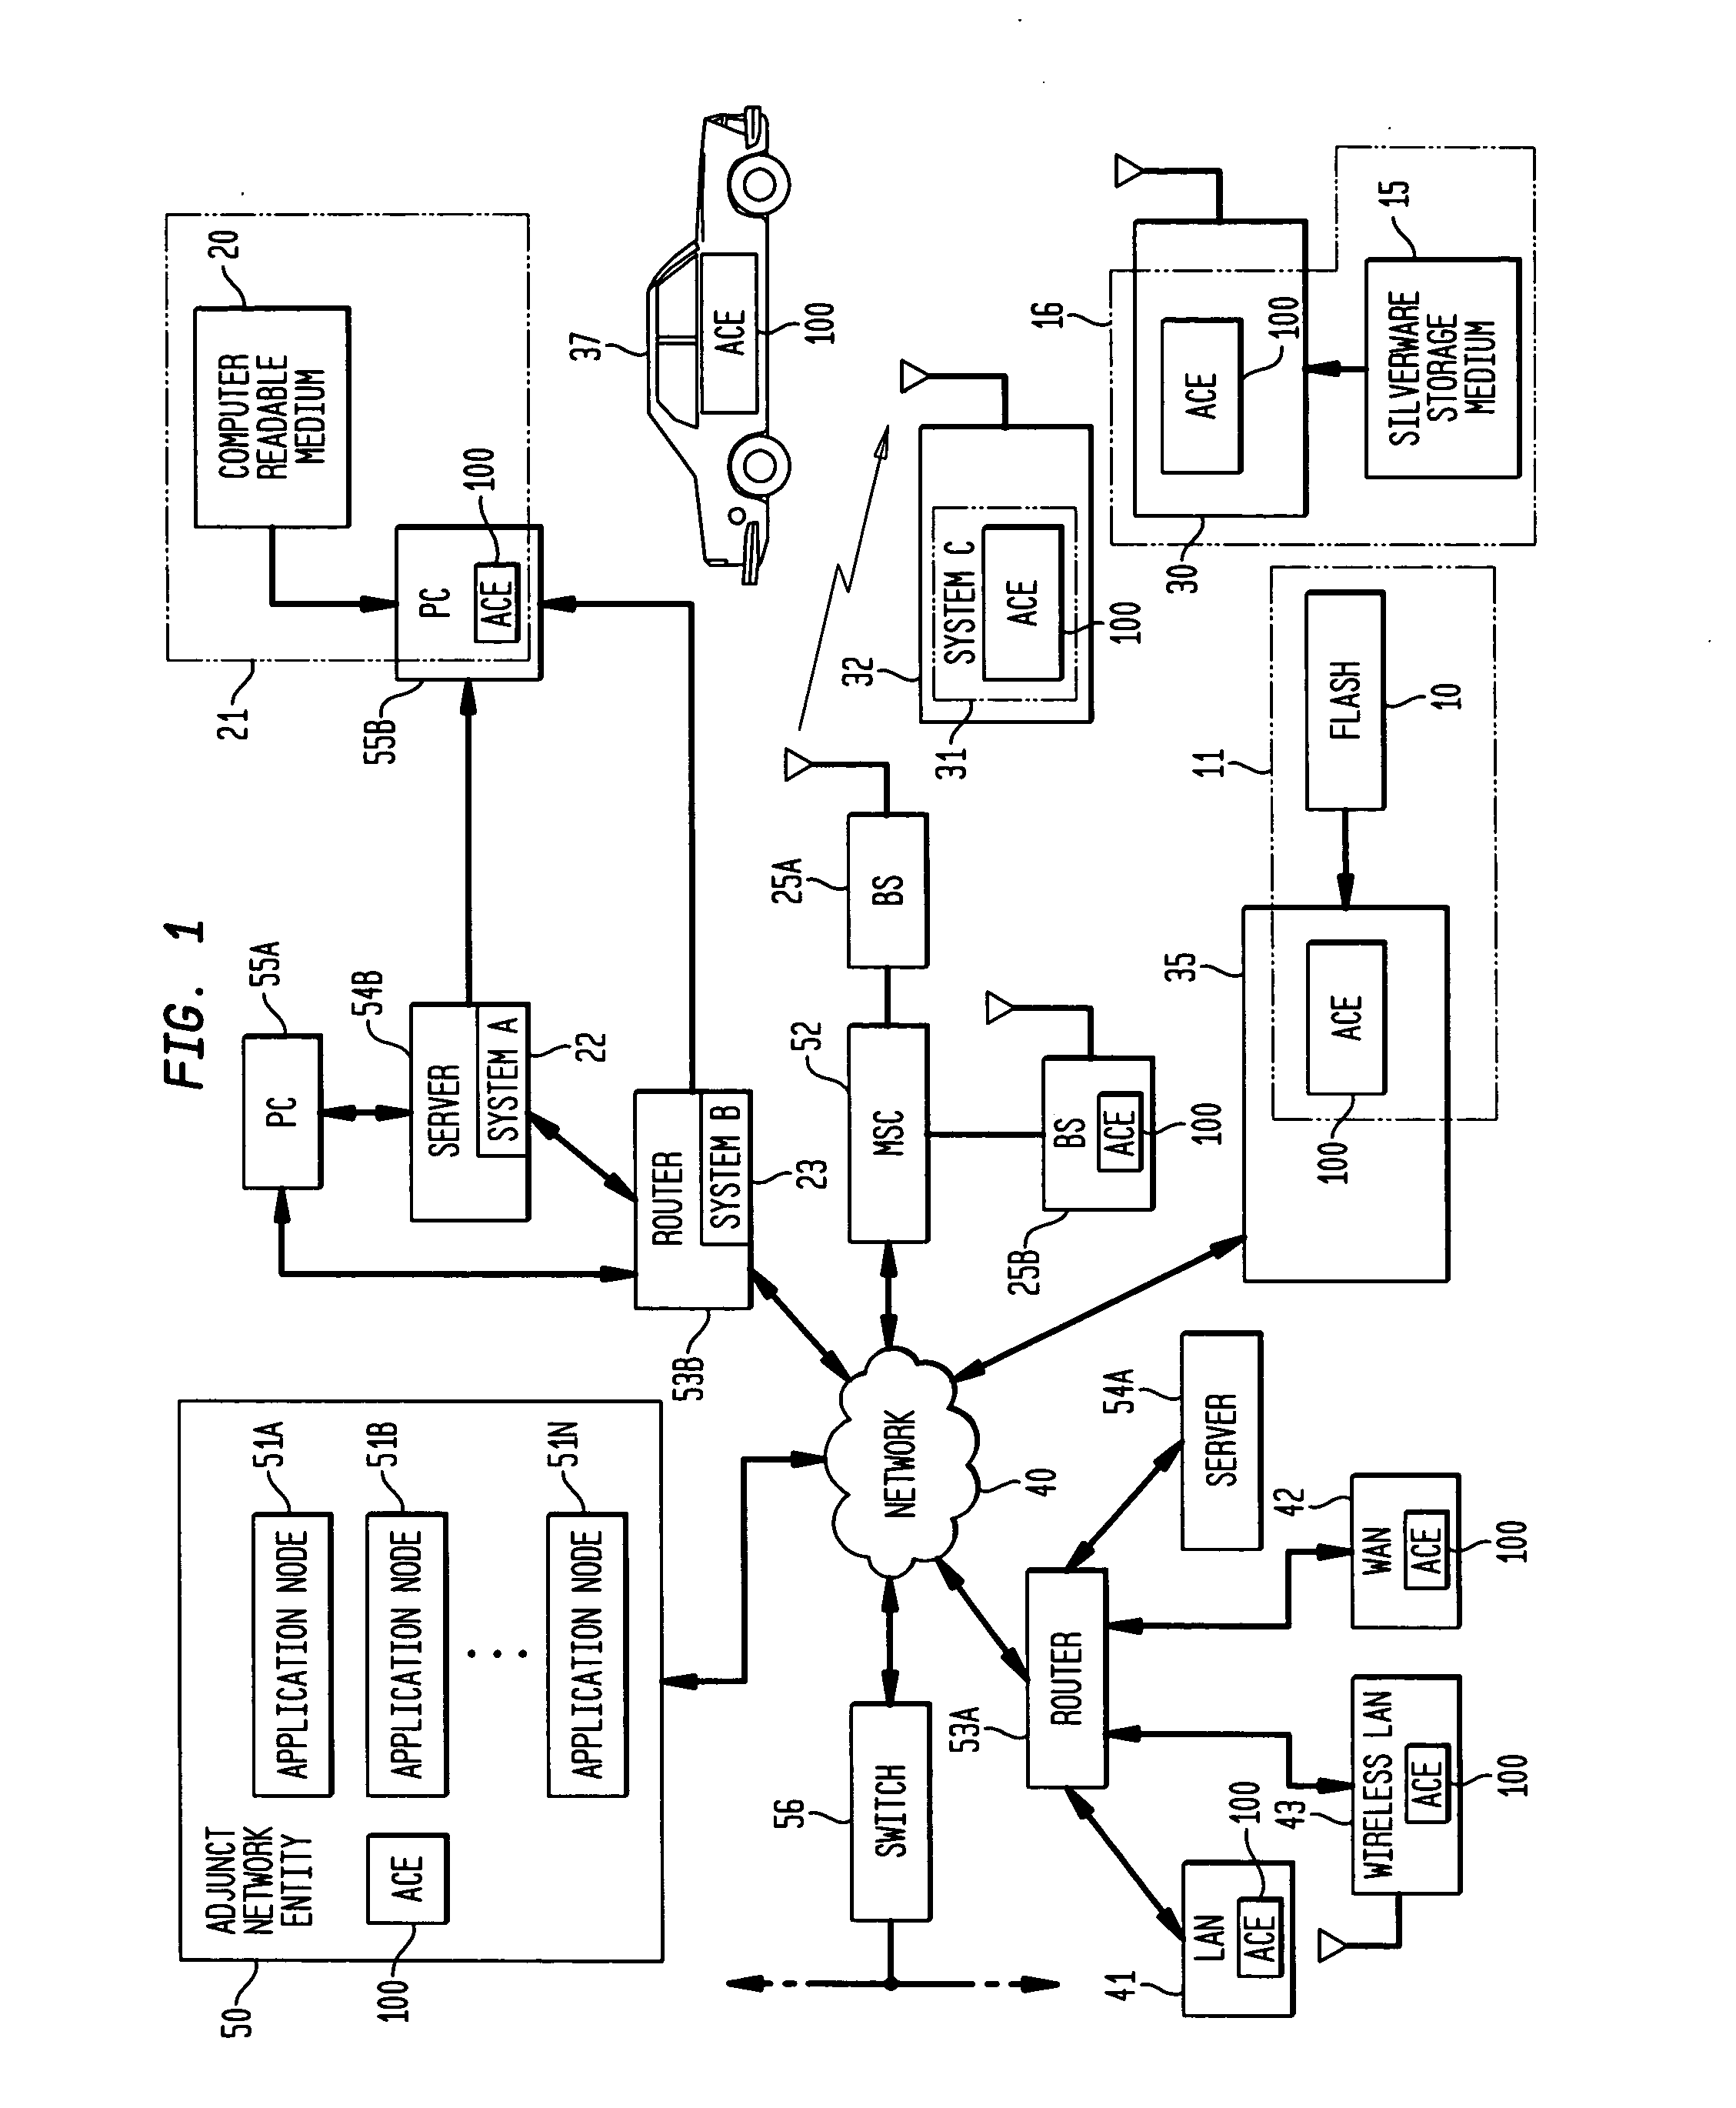 Apparatus, method and system for generating a unique hardware adaptation inseparable from correspondingly unique content